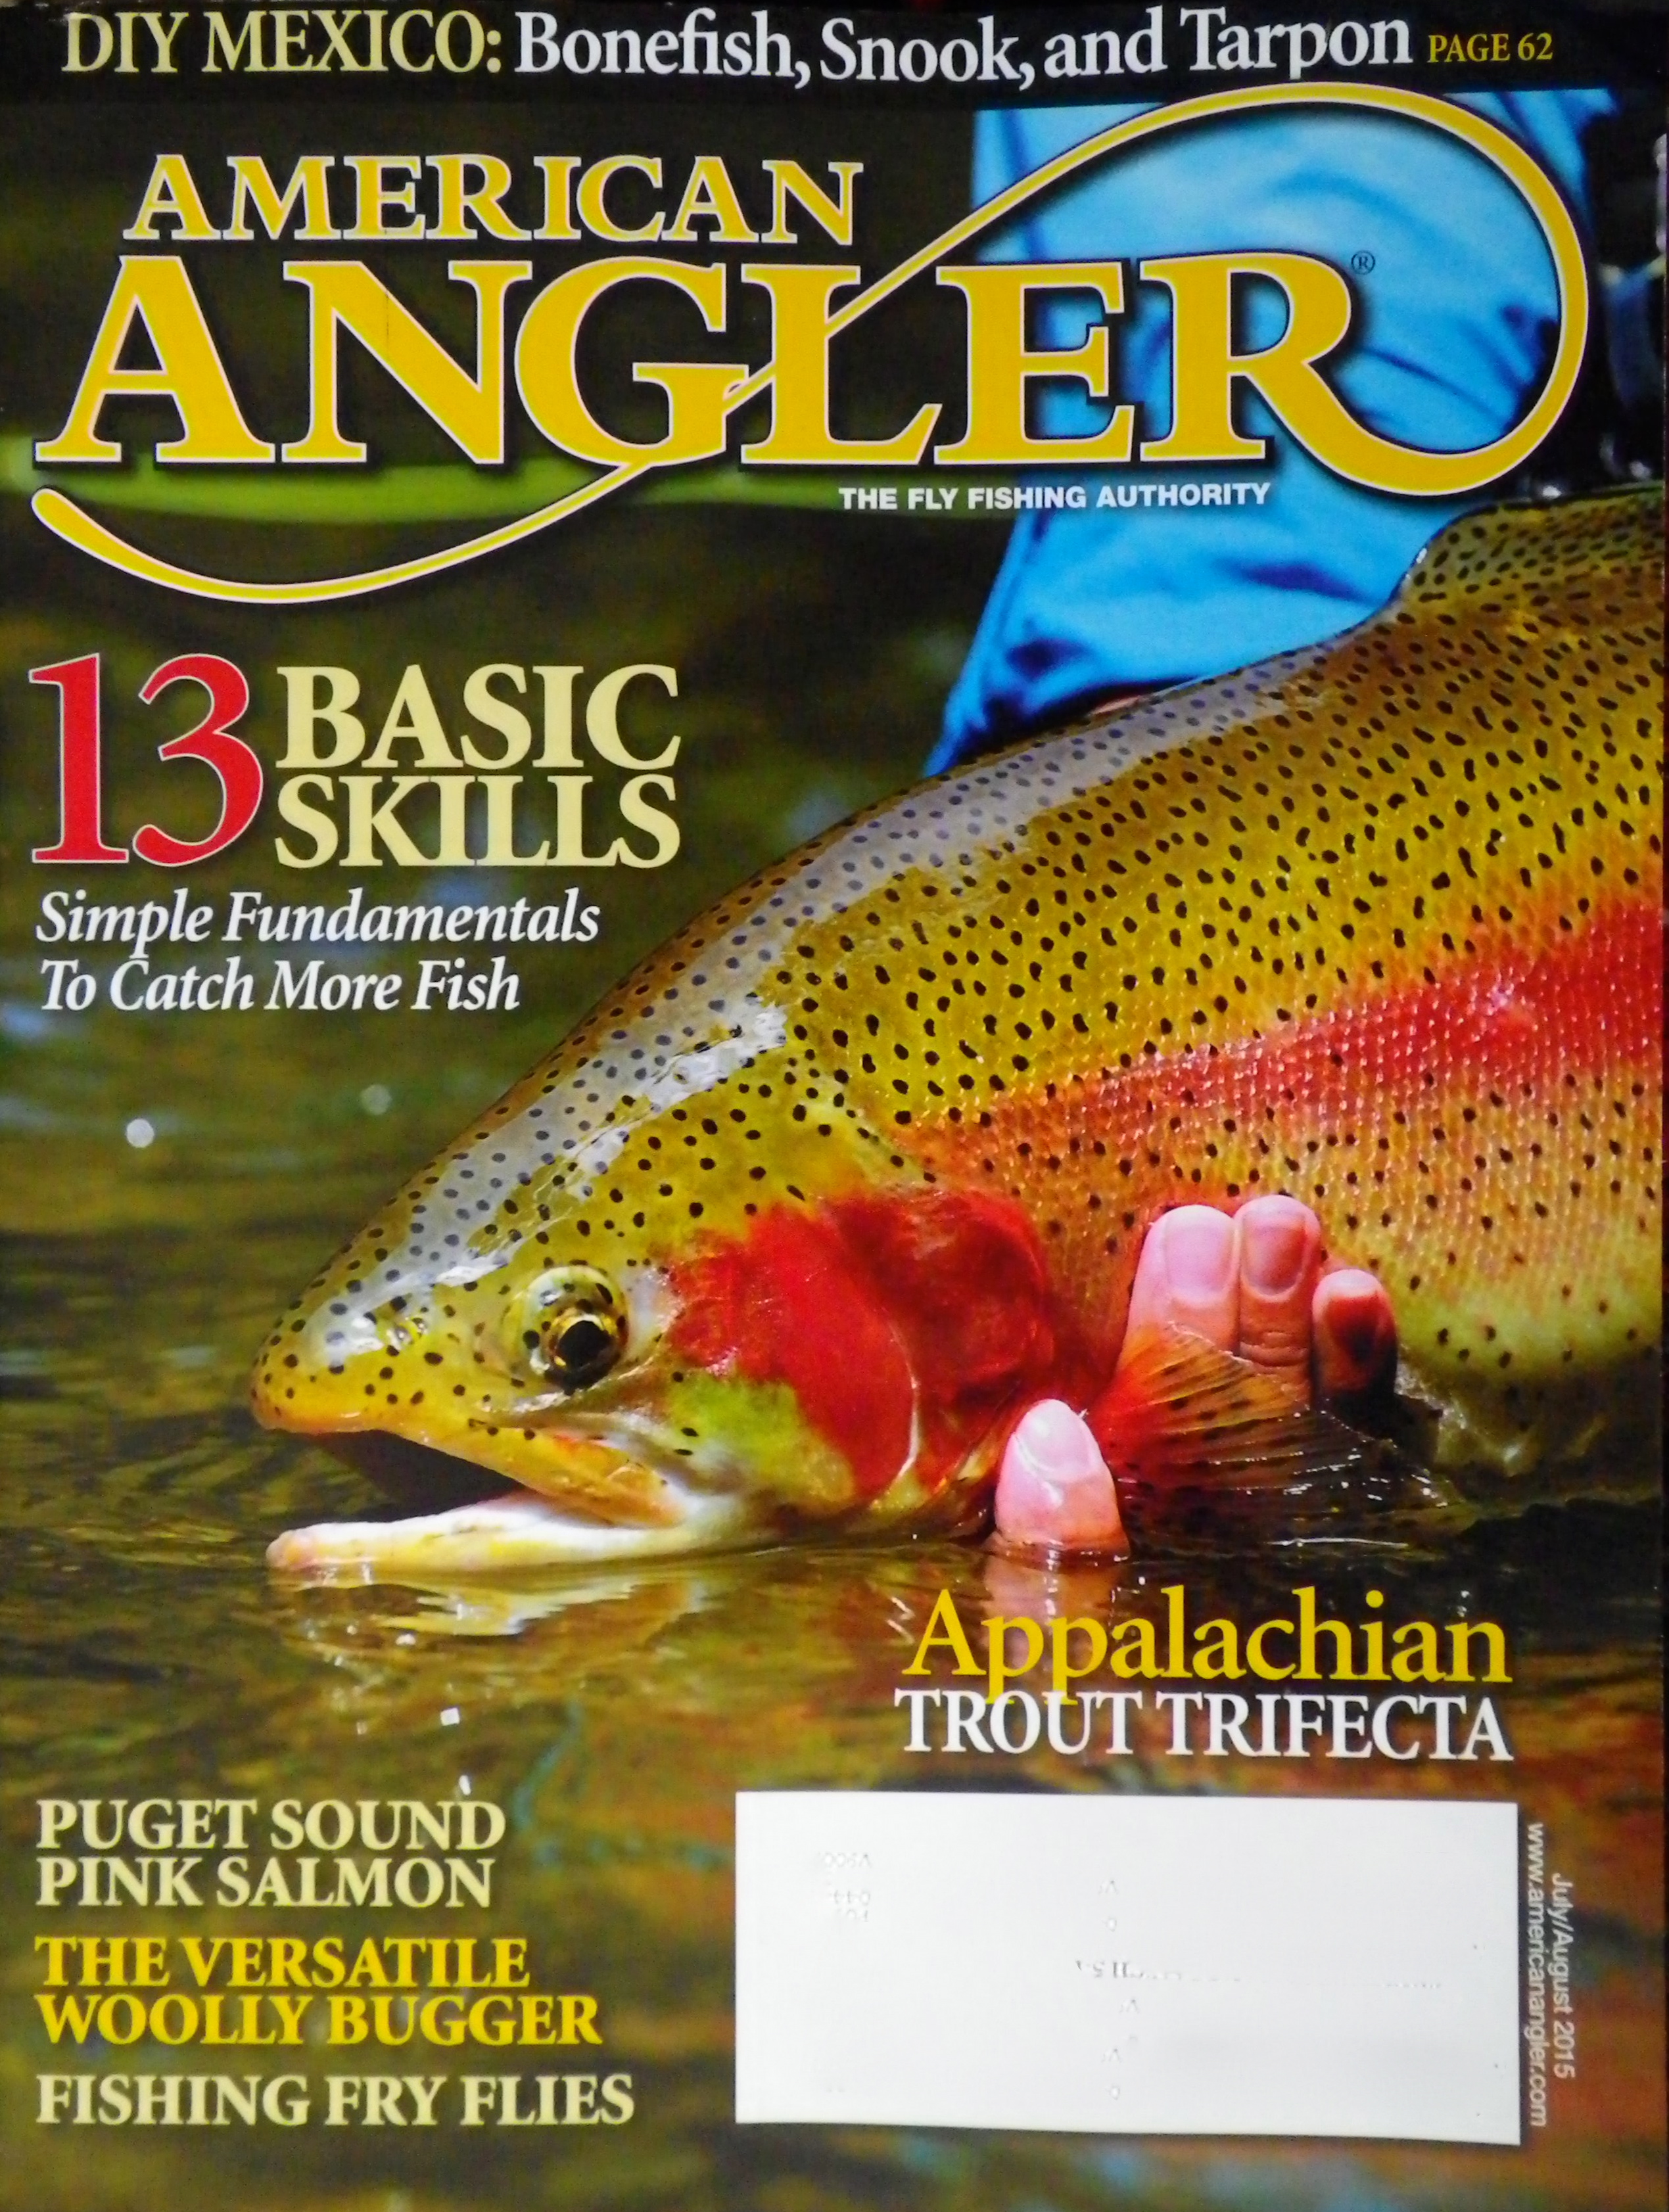 The Little Things” in the July/August 2015 of American Angler